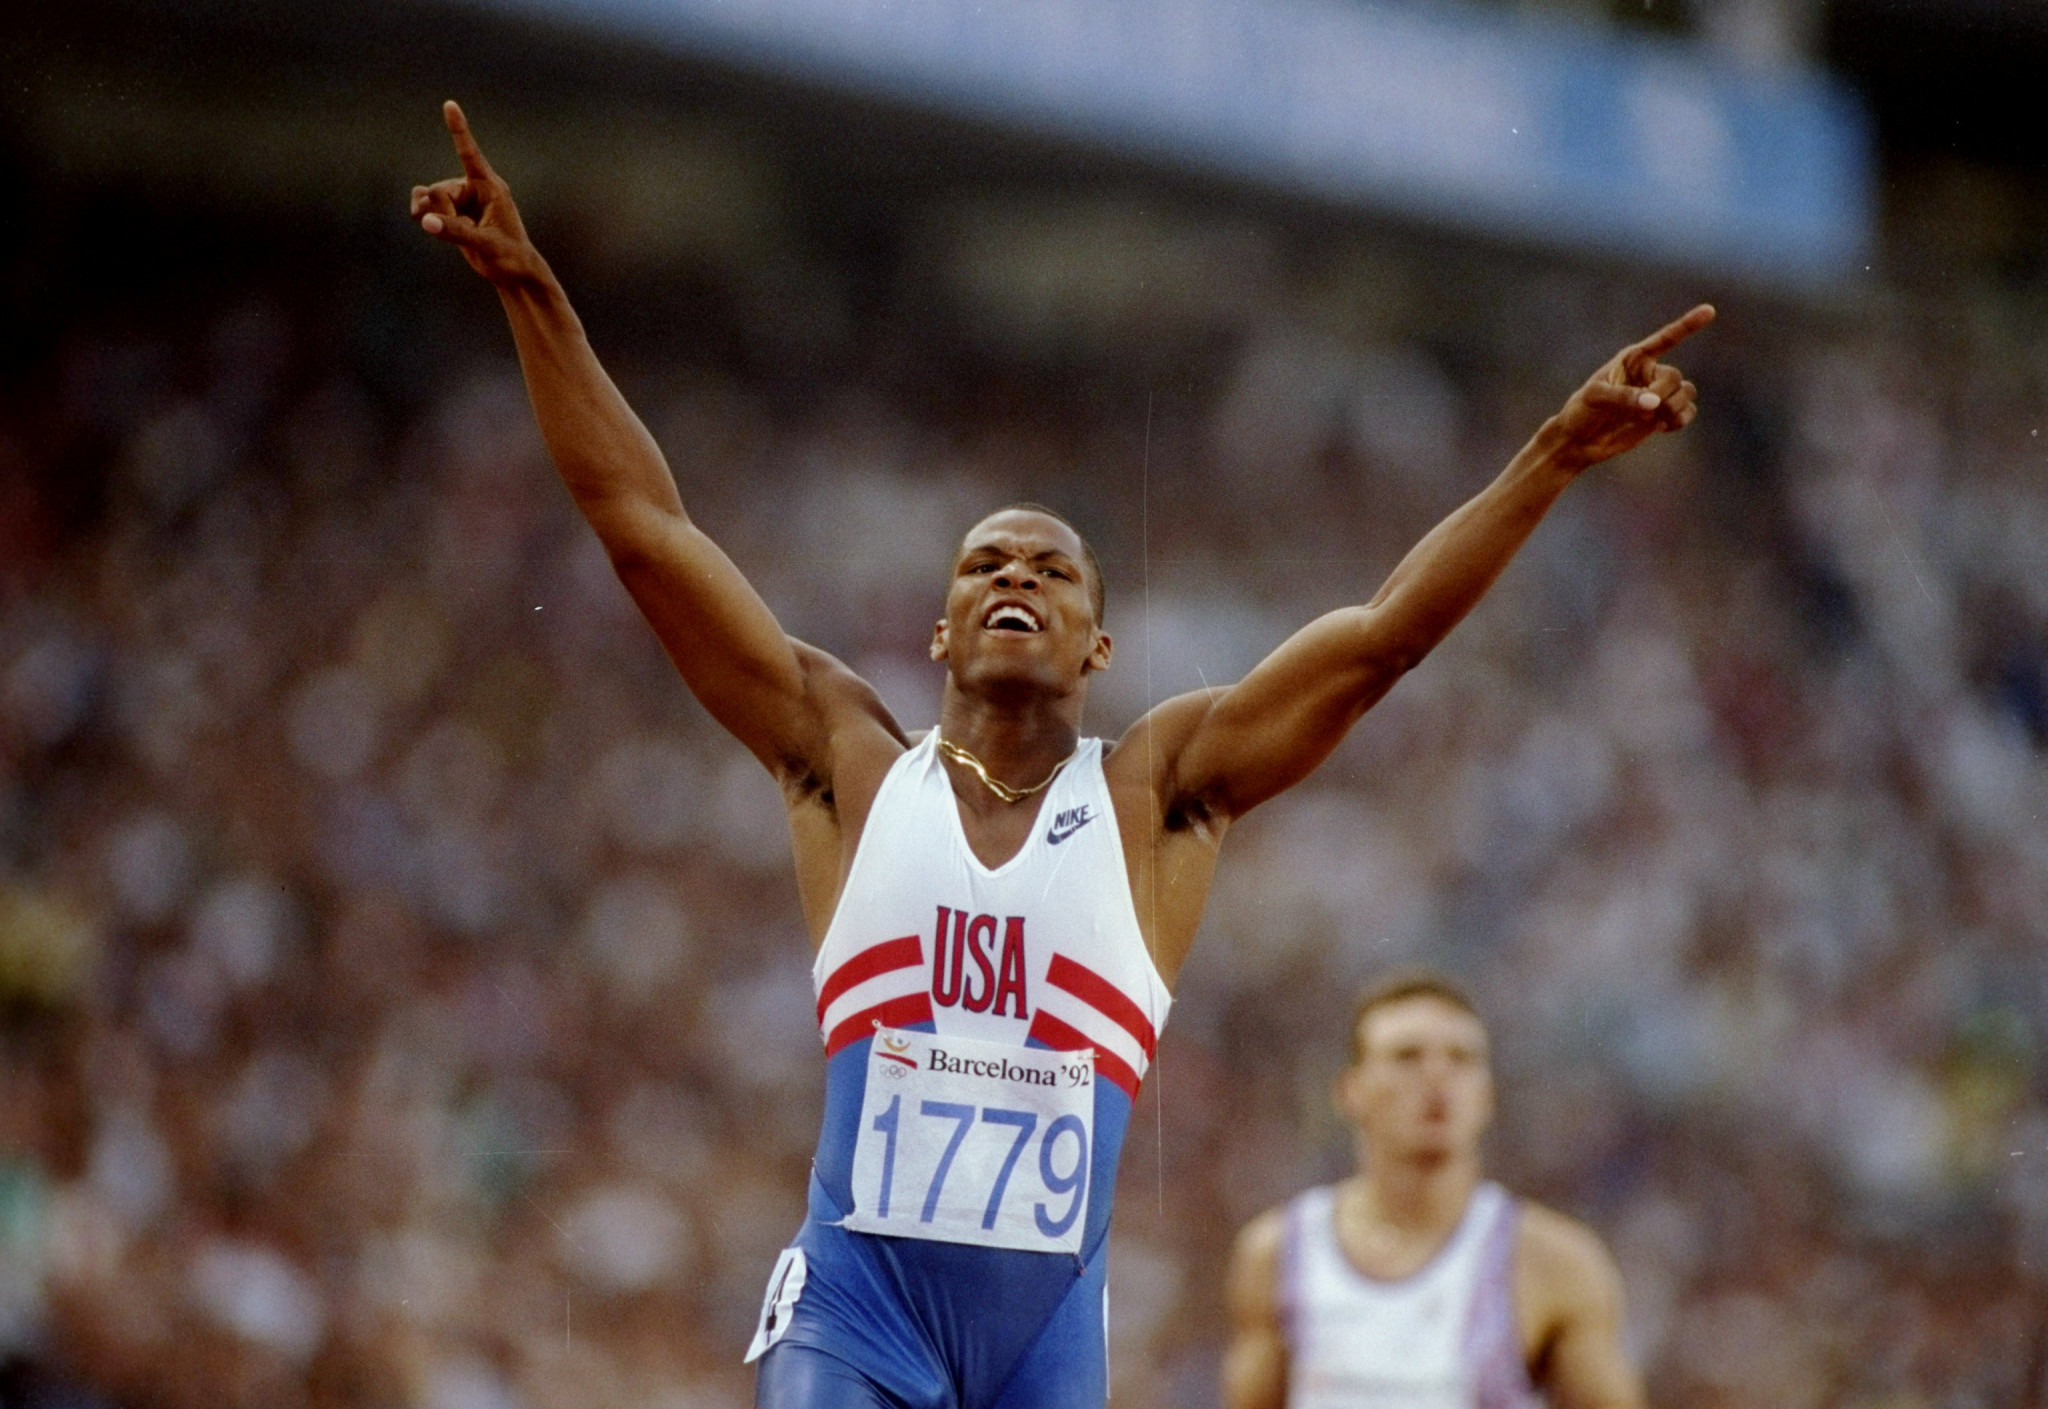 Fred Kerley is now being coached by the 1992 Olympic 400m gold medallist Quincy Watts ©Getty Images